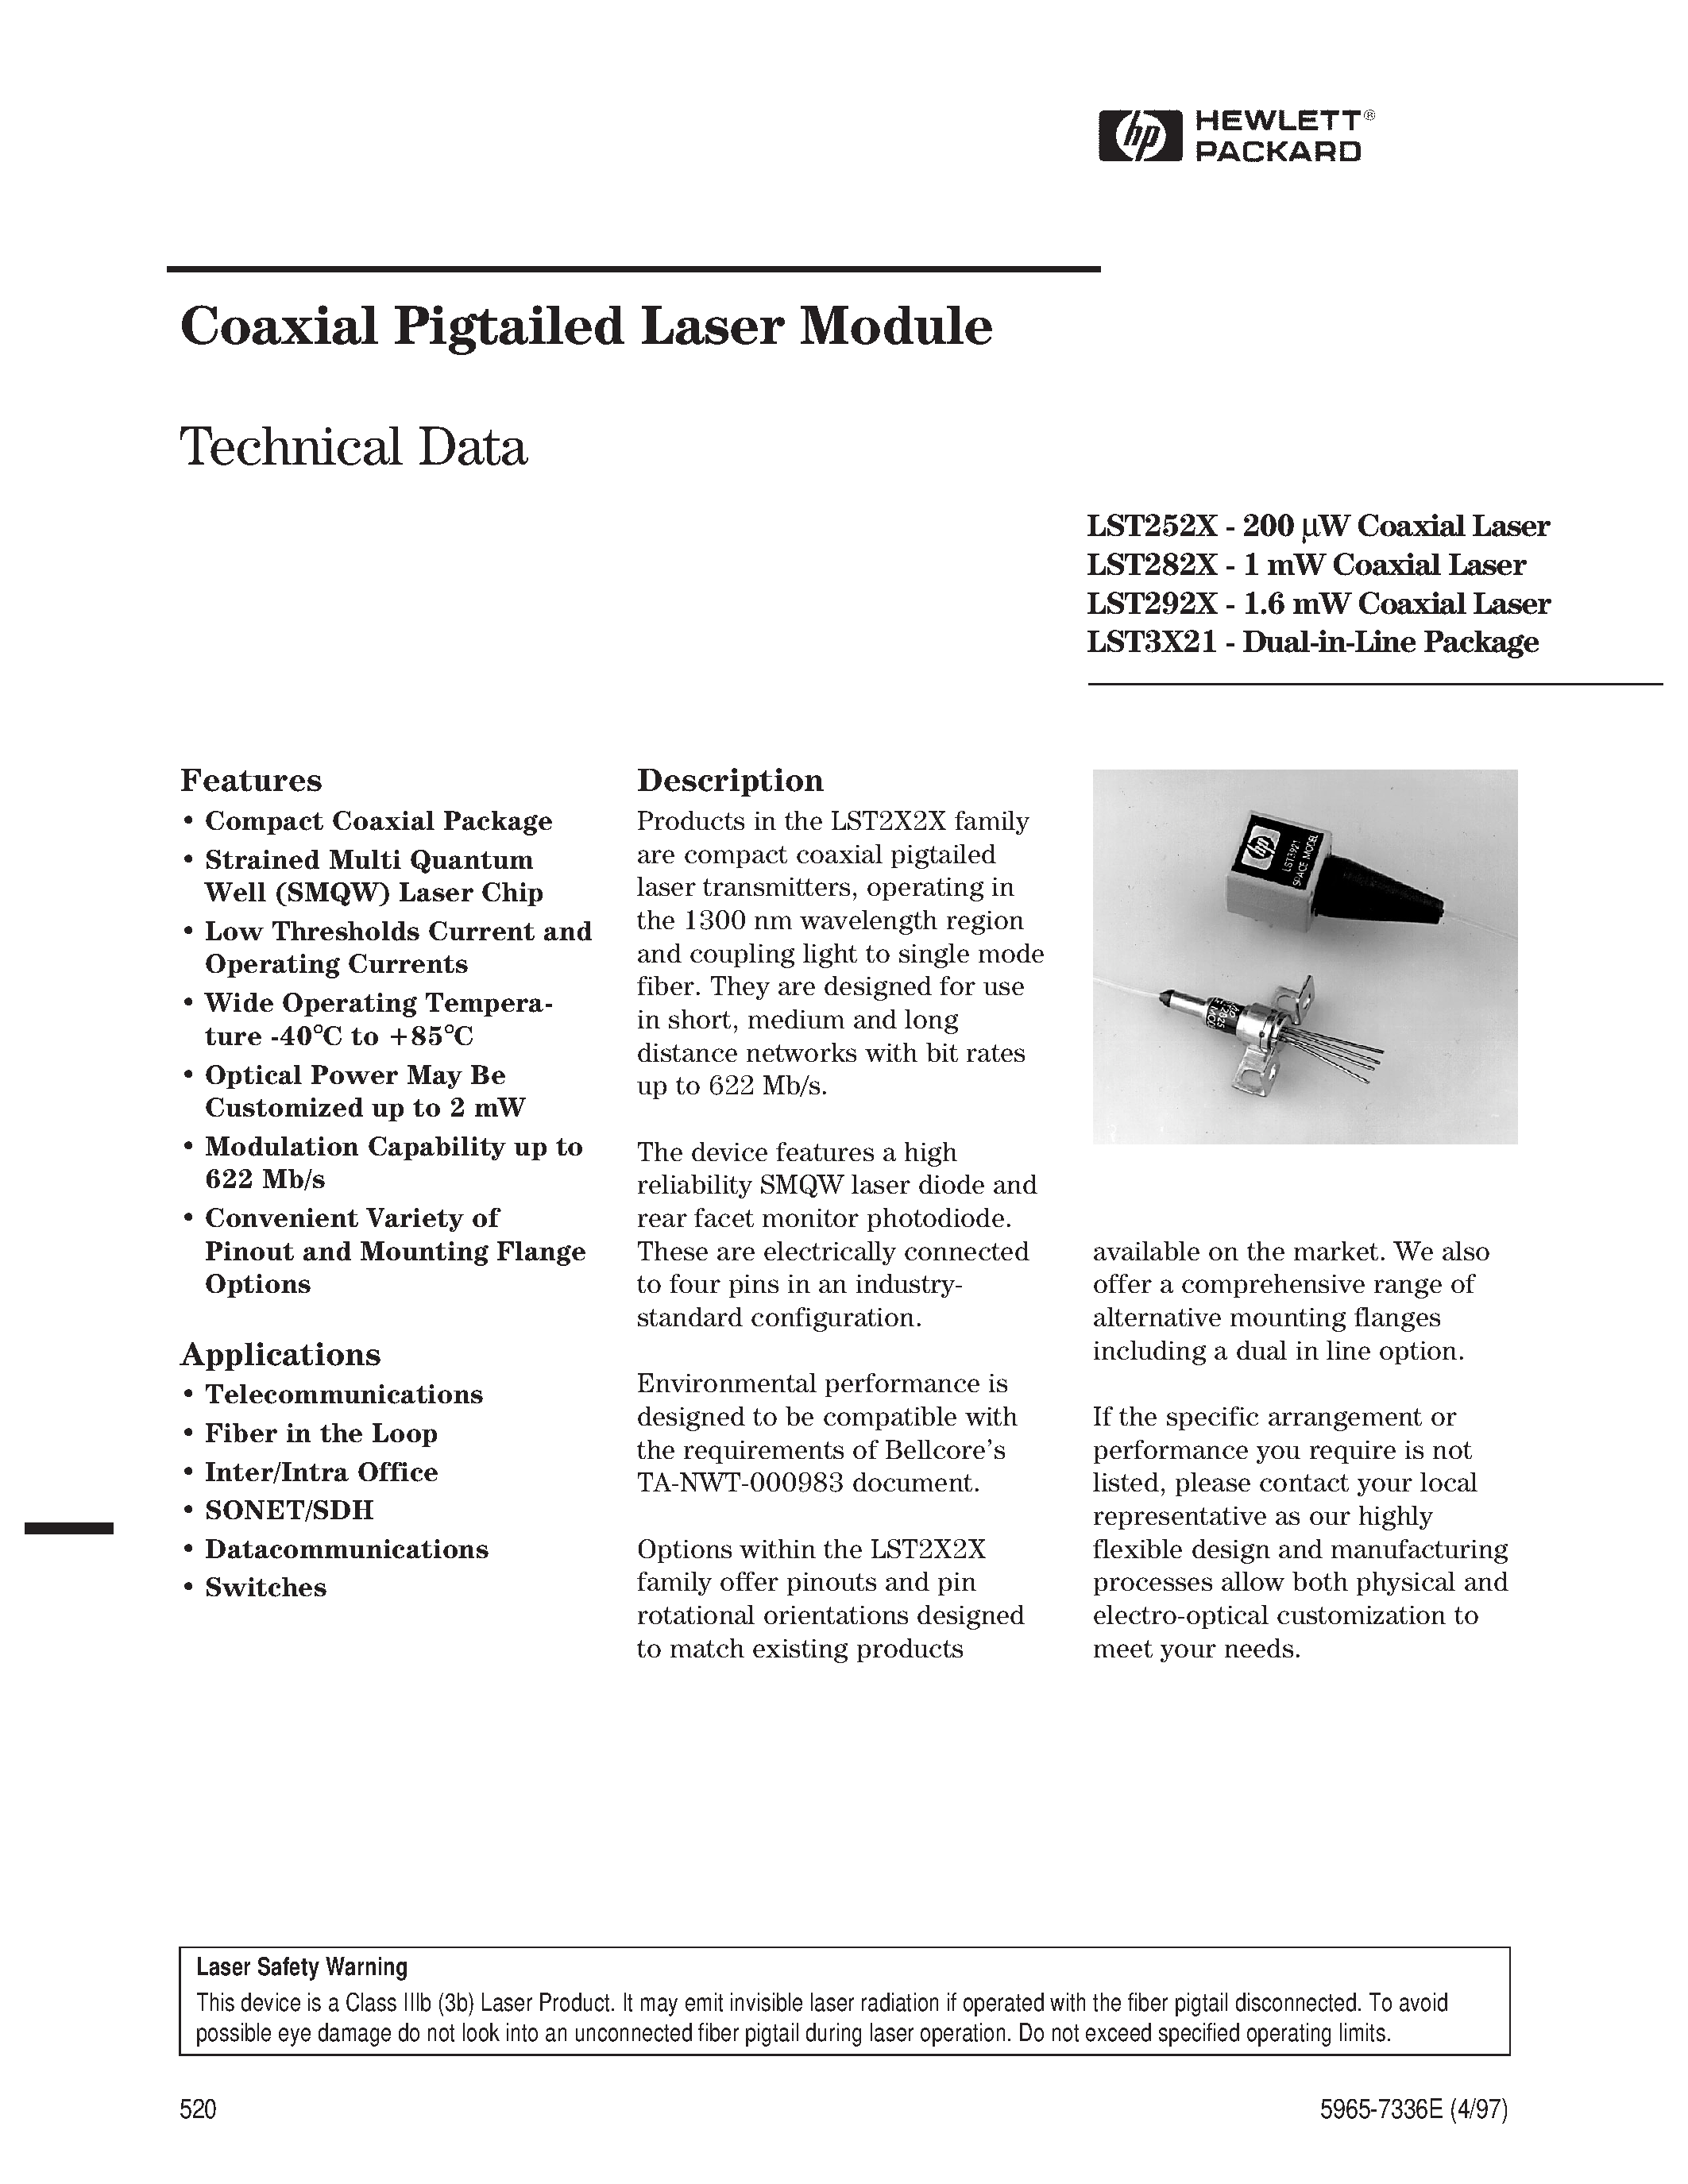 Даташит LST2425B-B-AP - Coaxial Pigtailed Laser Module страница 1